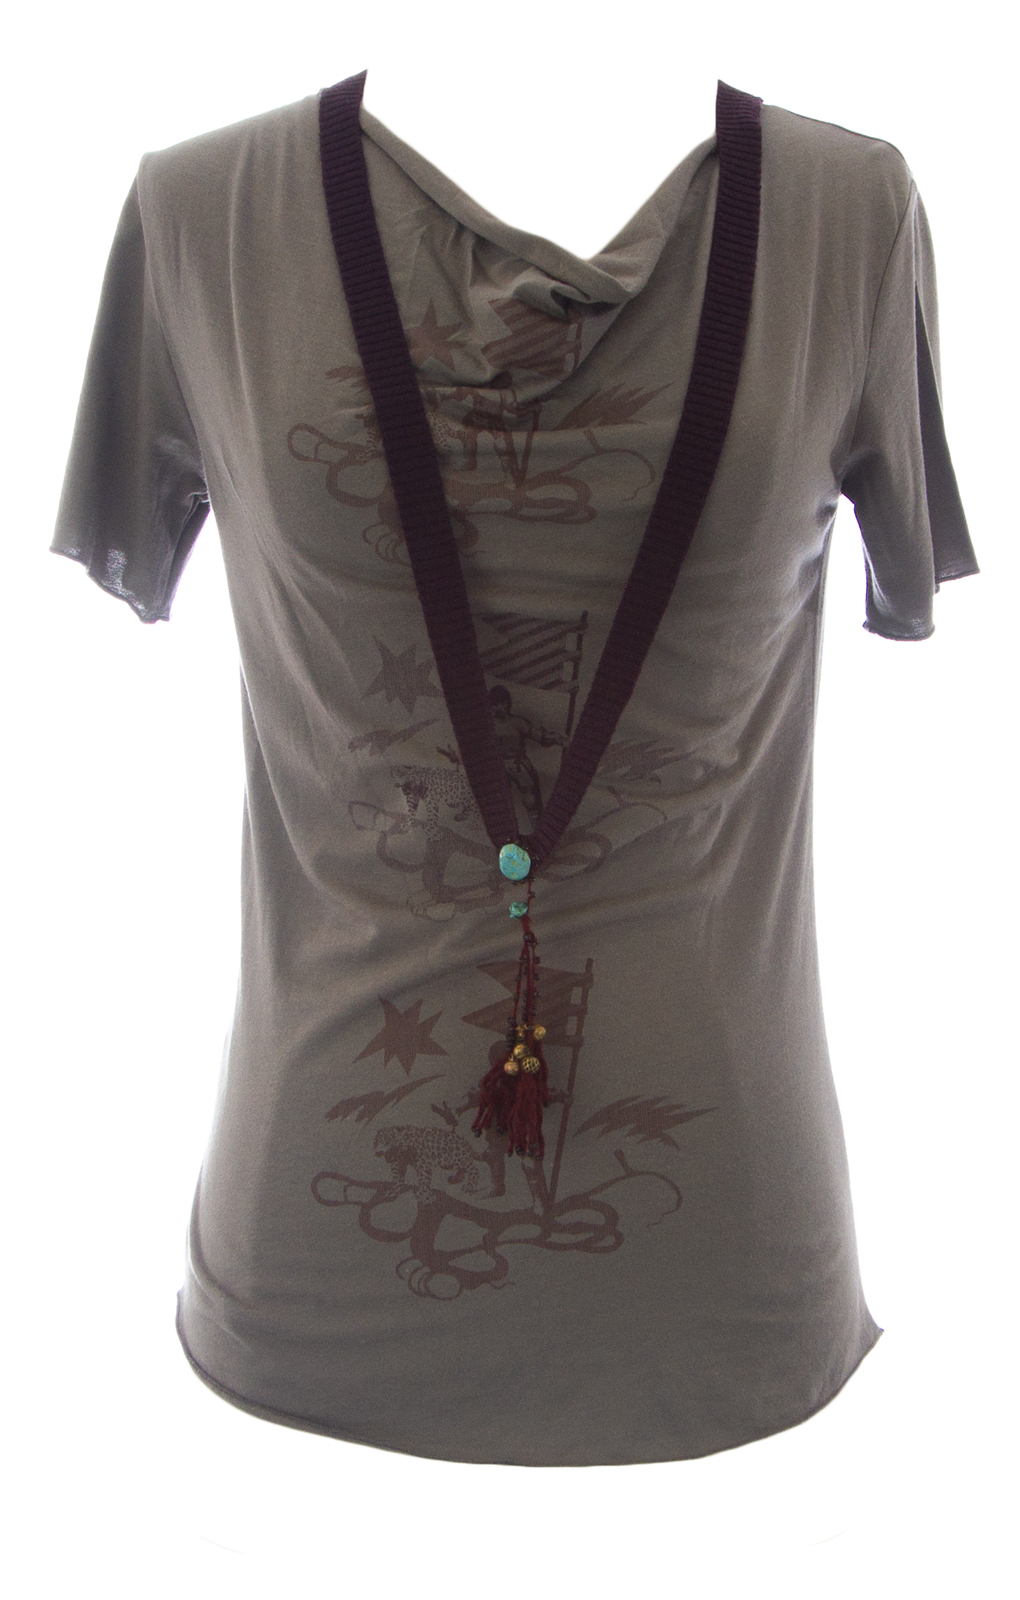 ETERNAL CHILD Women's Grey Printed Tee W/ Attached Necklace NEW